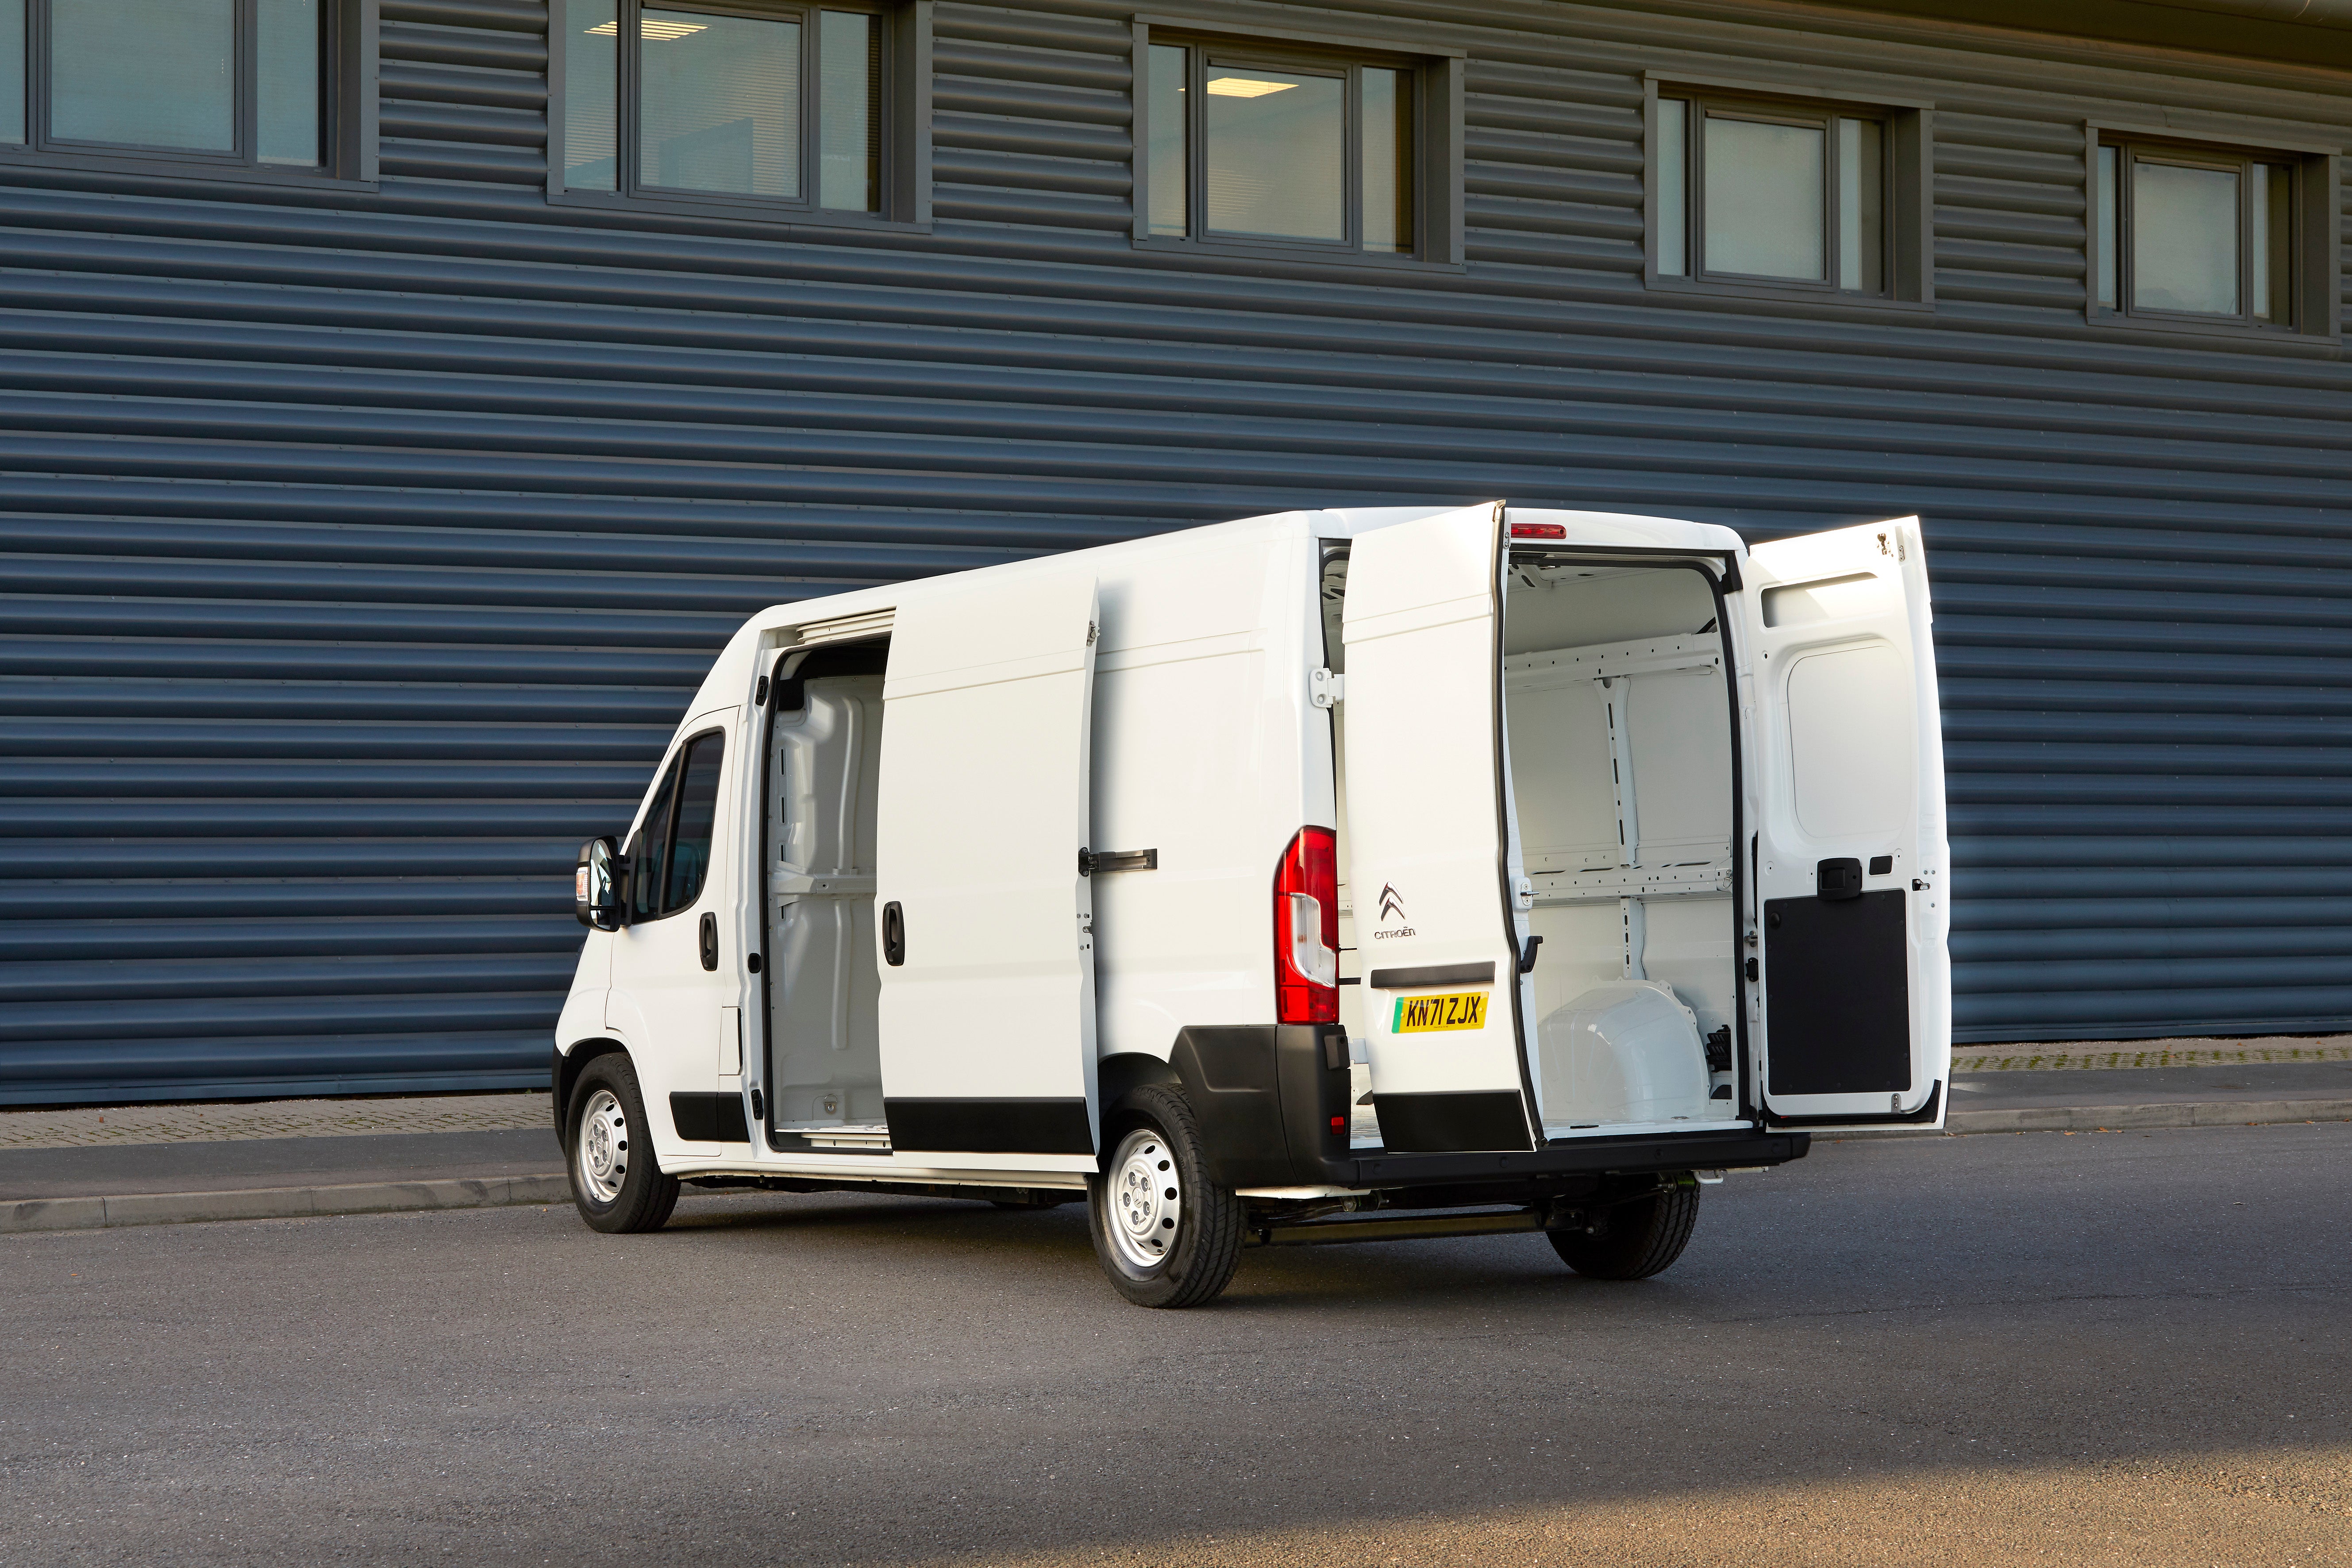 The Citroen e-Relay and Peugeot e-Boxer are available in three van sizes, plus window van and chassis cab options.